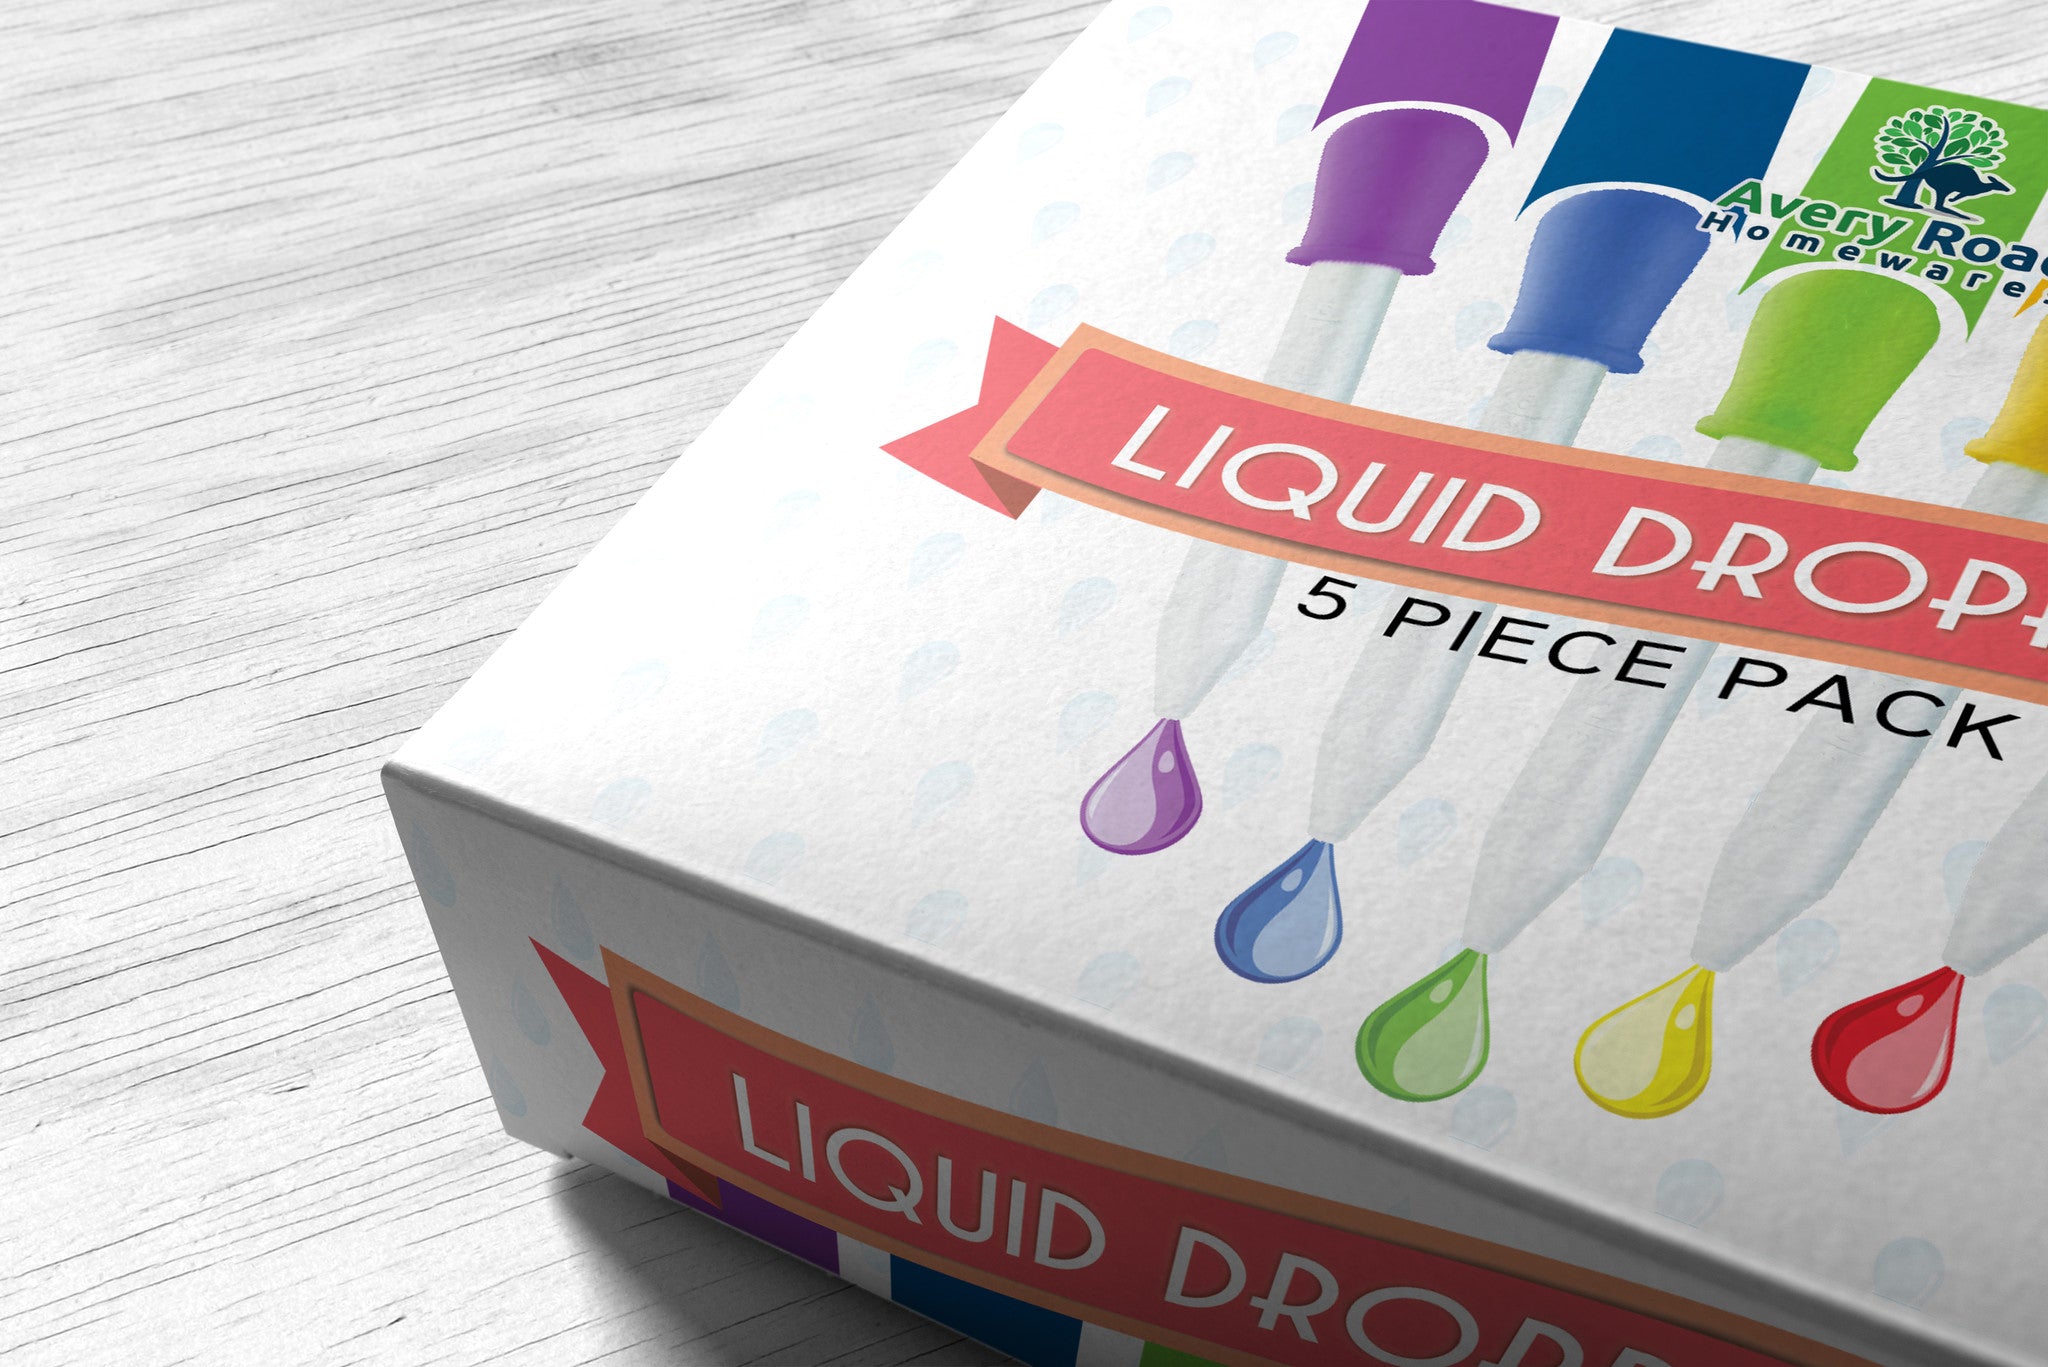 New Liquid DROPPER - 5 x FDA Approved Silicone and Plastic DROPPERS – Avery  Road